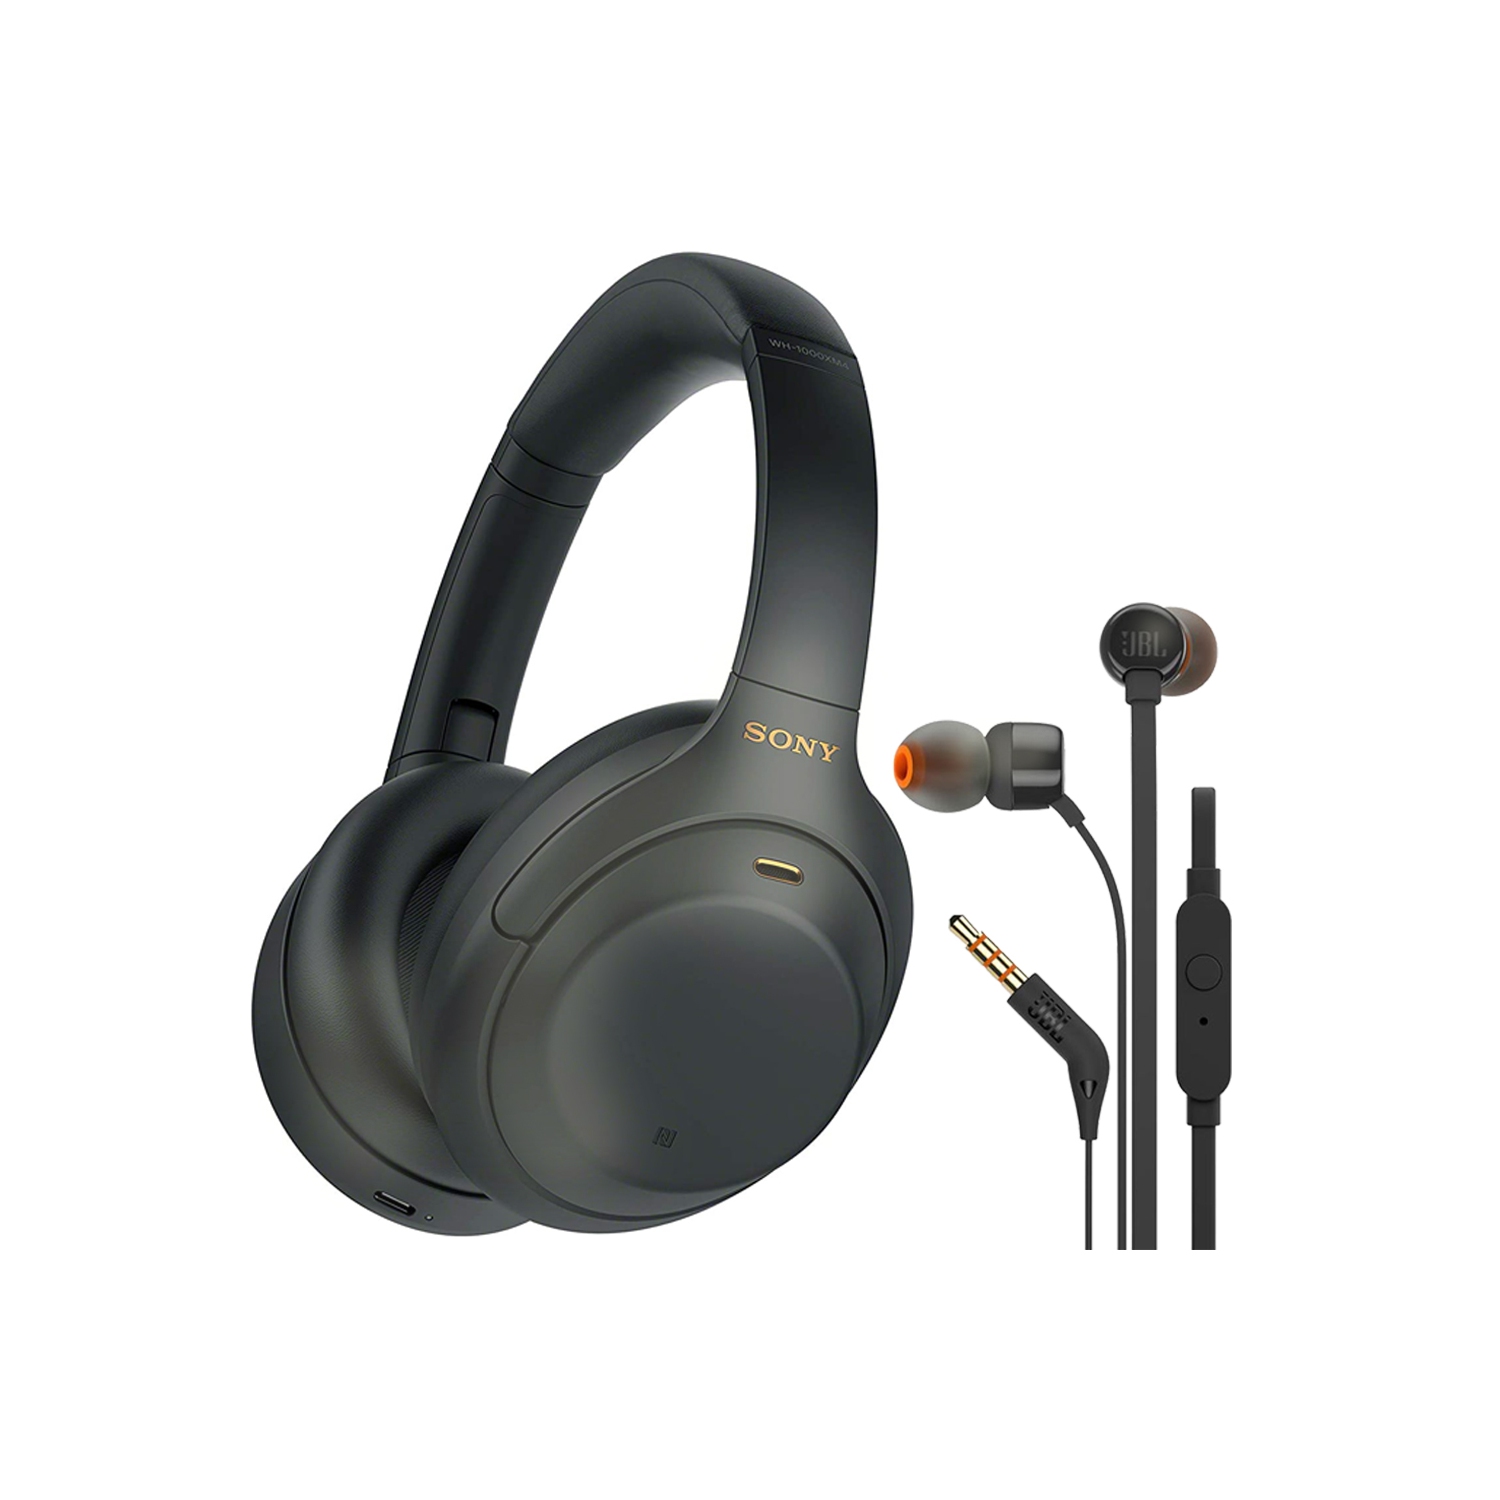 Sony WH-1000XM4 Wireless Noise Canceling Over-the-Ear Headphones with Google Assistant and Alexa + JBL T110 in Ear Headphones Black (Open Box) International Model